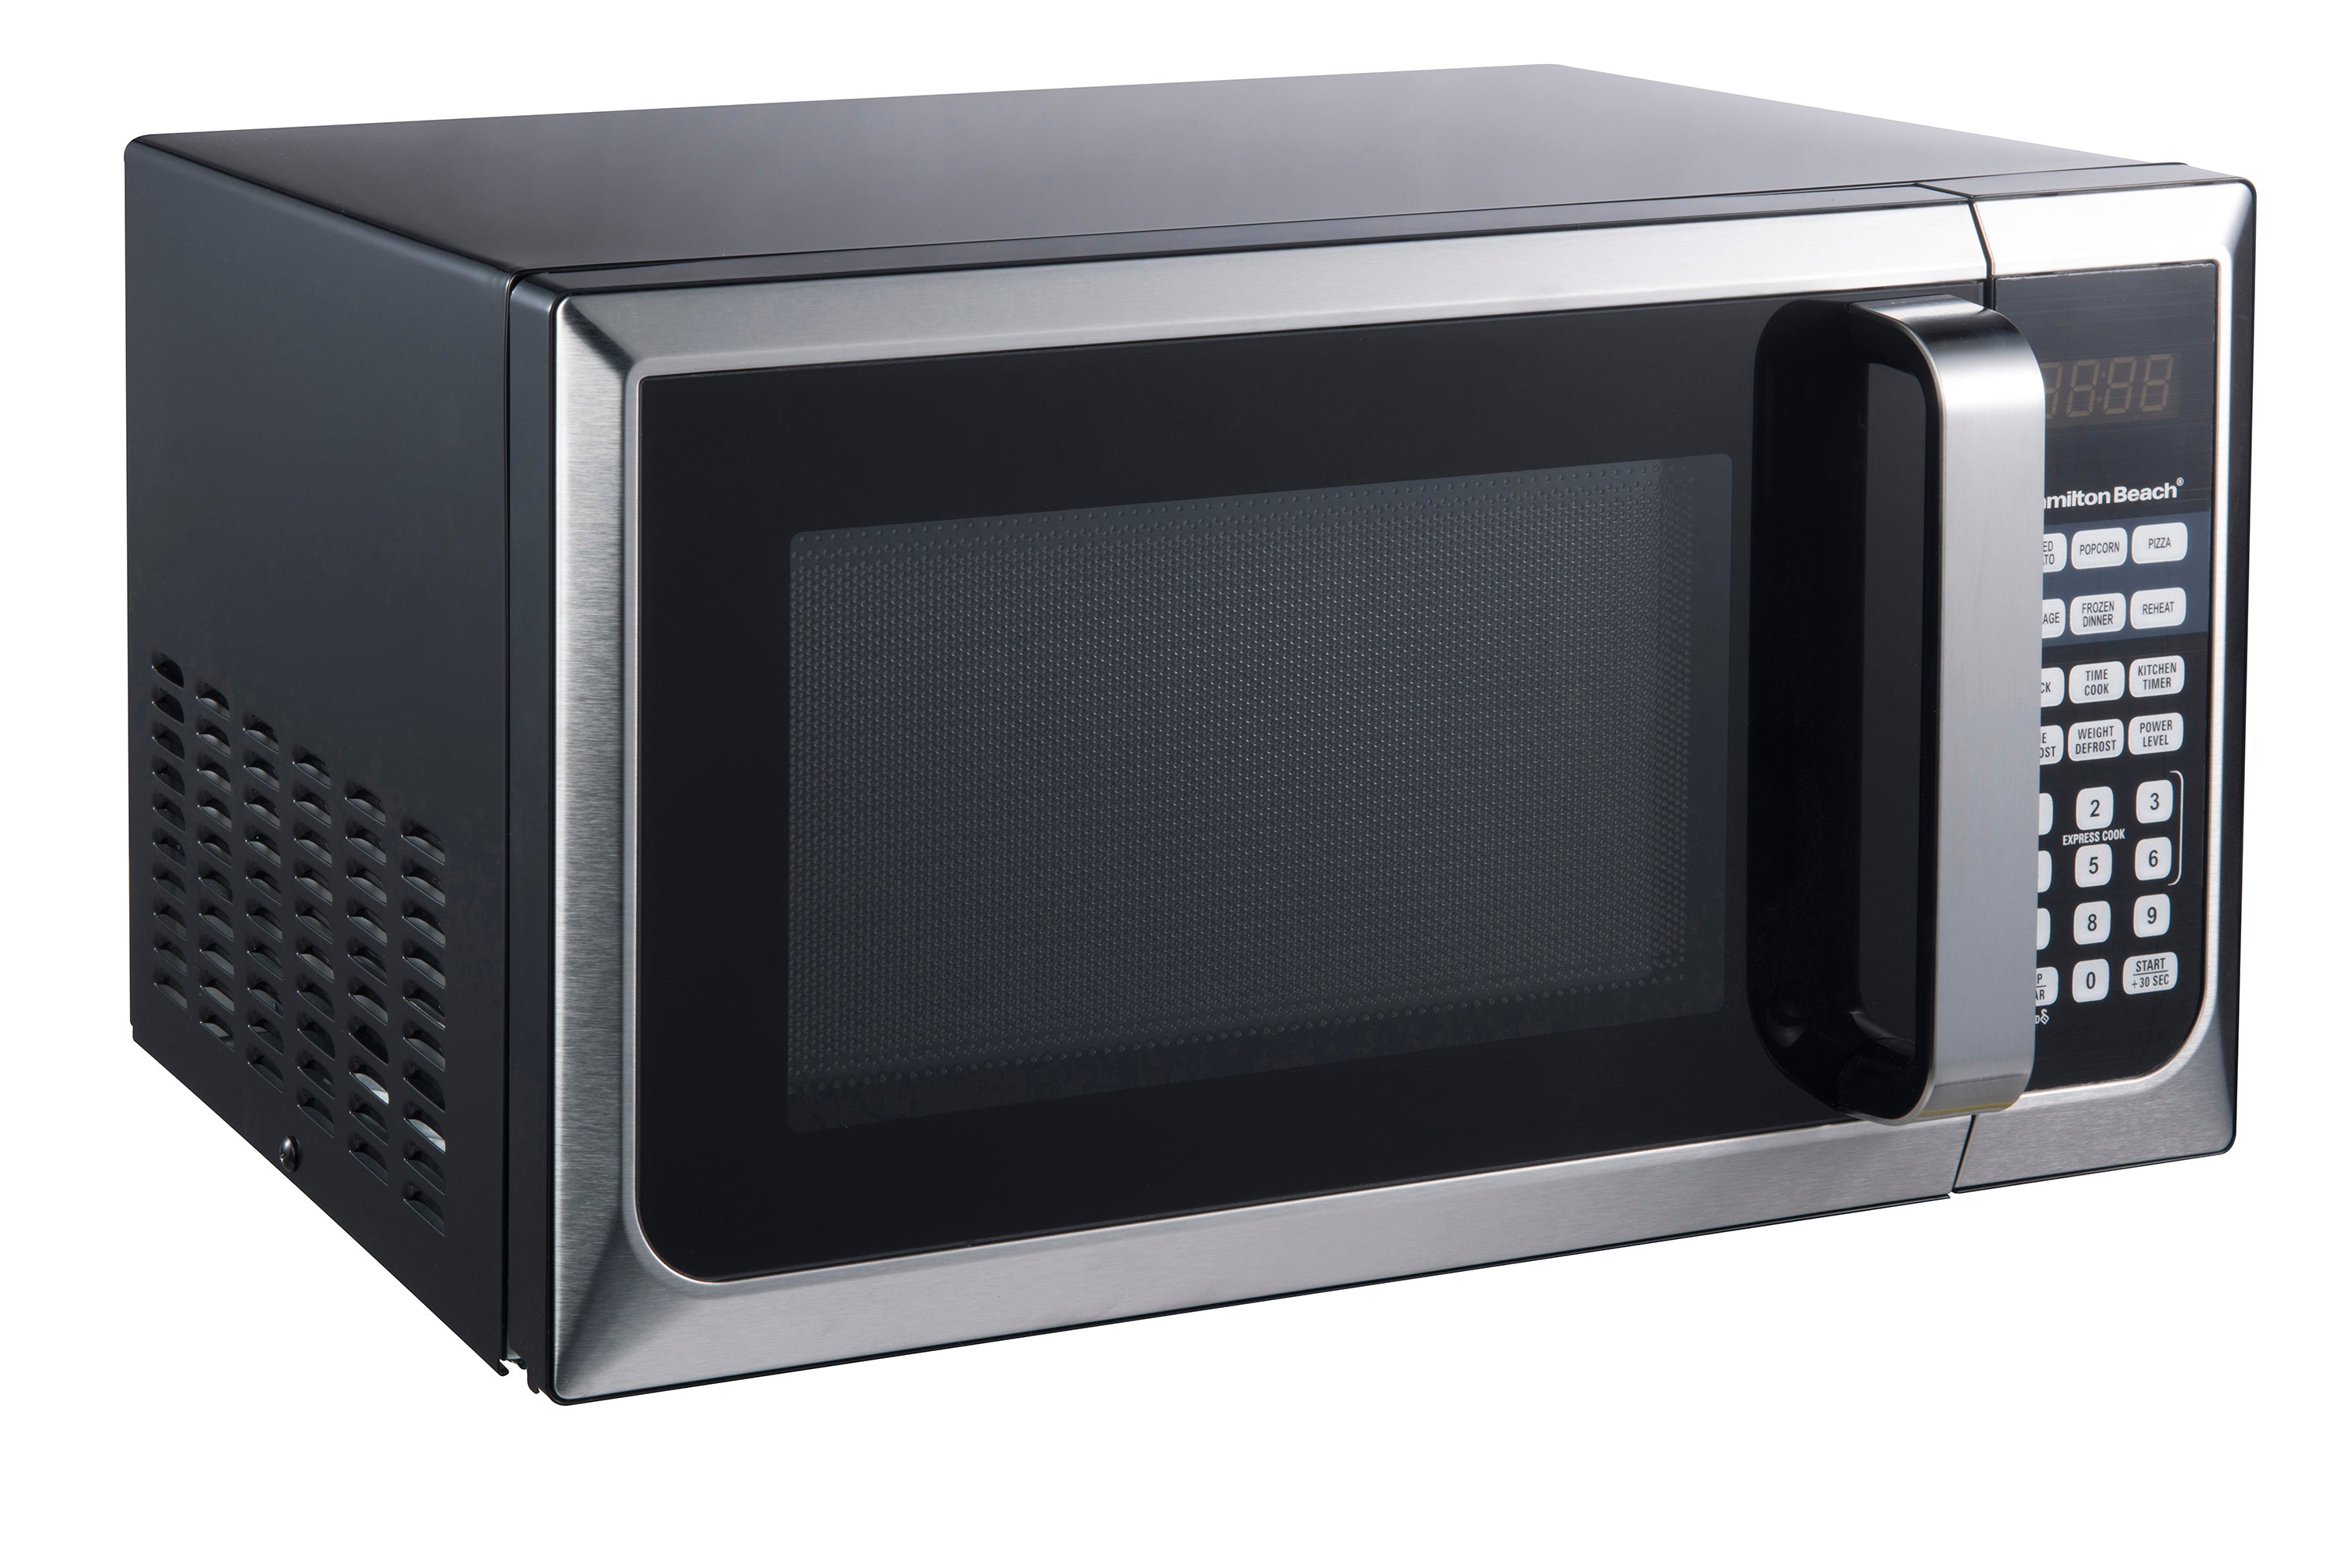 Microwave Oven 0.9 Stainless Steel Countertop Ft. Cu. Beach Hamilton 900W Air-microwave oven-AULEY